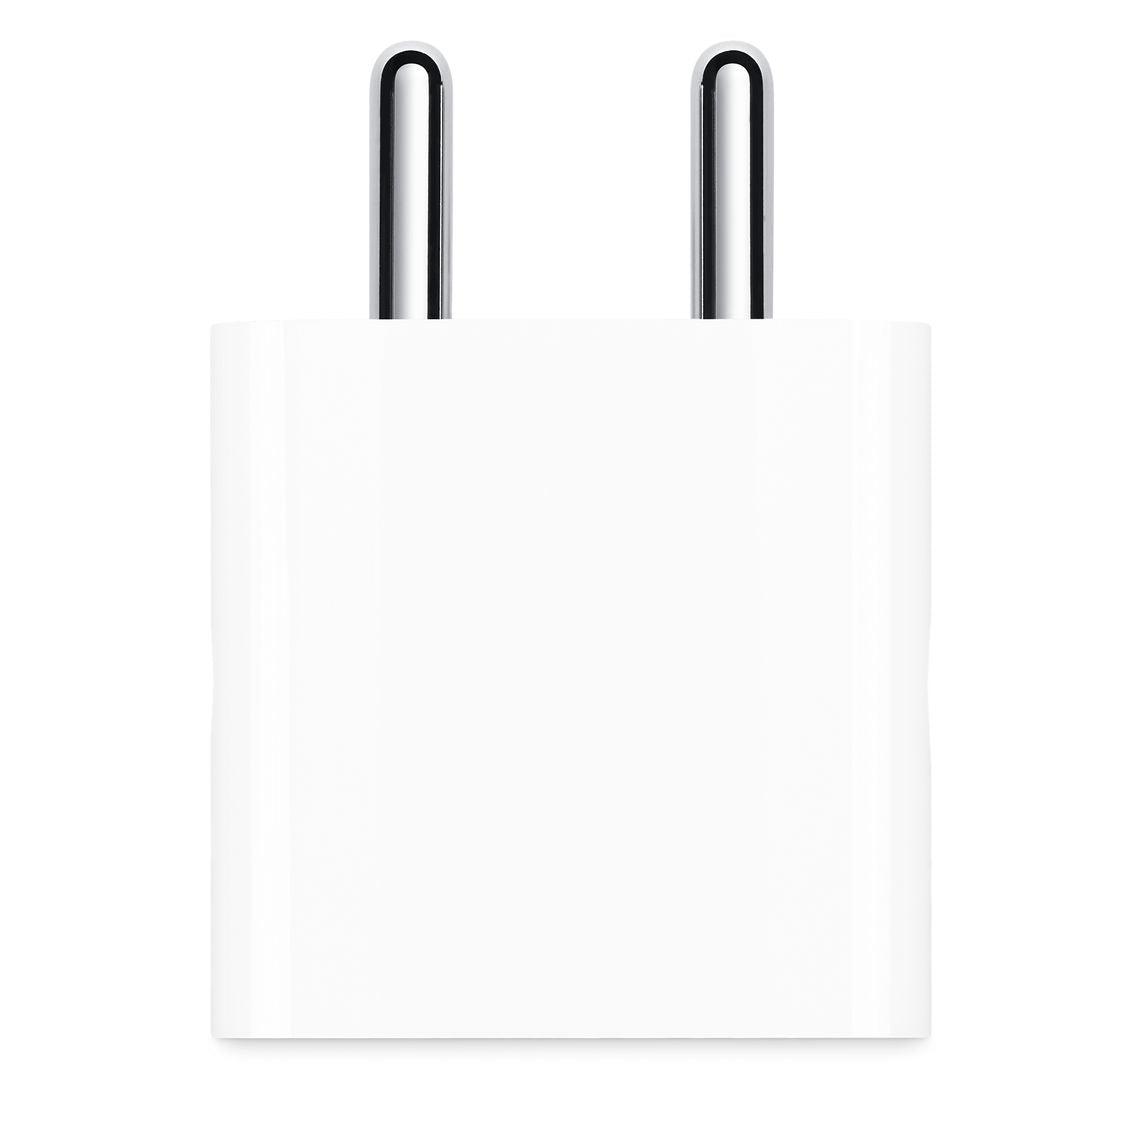 Apple - 20W USB-C Power Adapter - Model A2246 - Grab Your Gadget